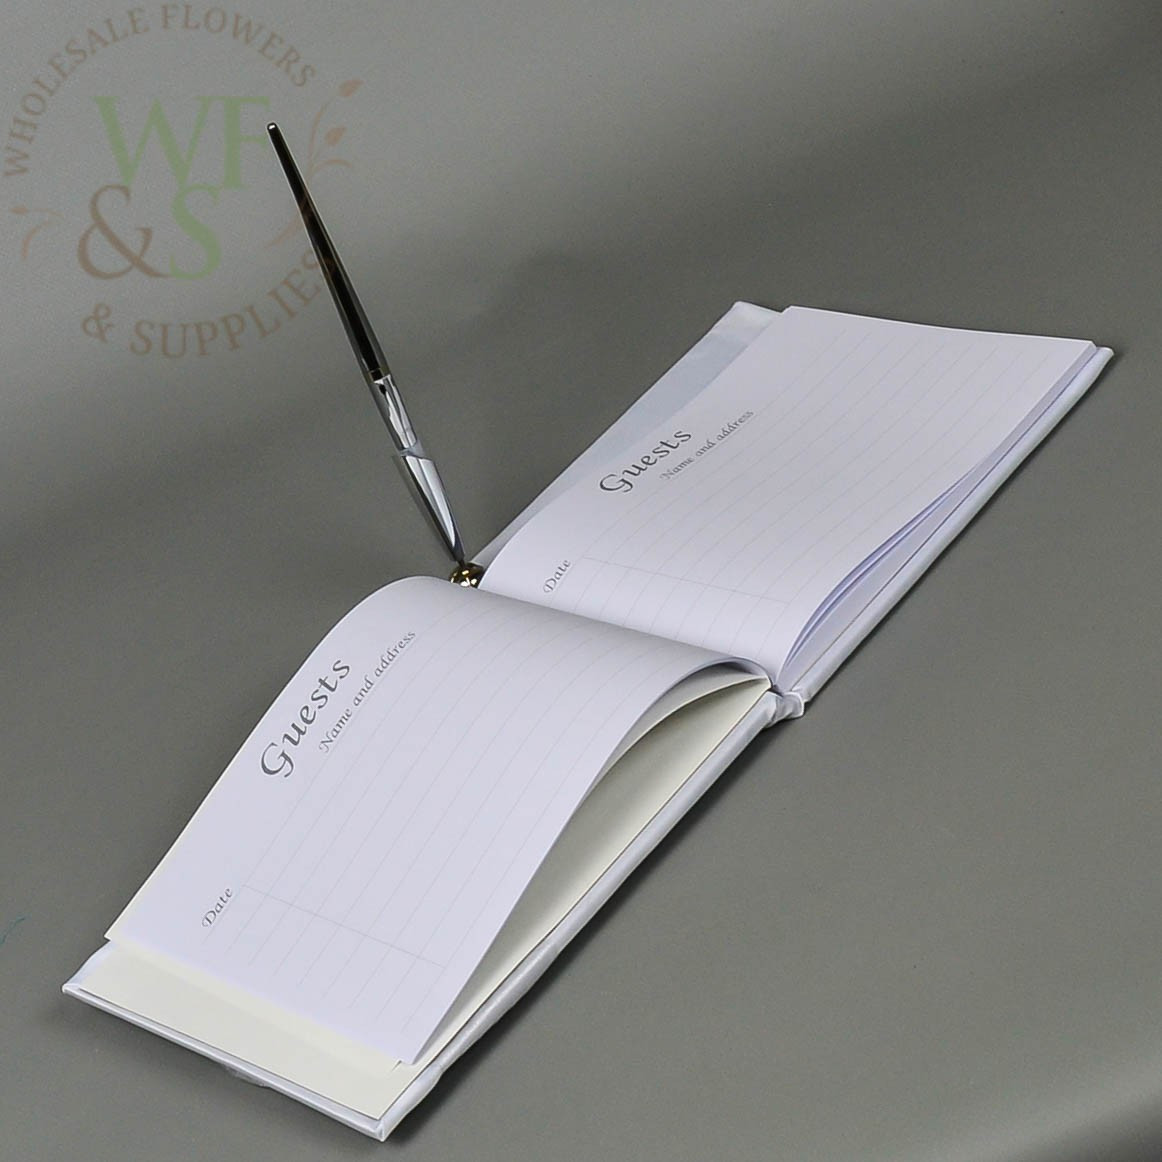 Wedding Guest Book With Pen
 Wedding Guest Book & Pen Set Wholesale Flowers and Supplies